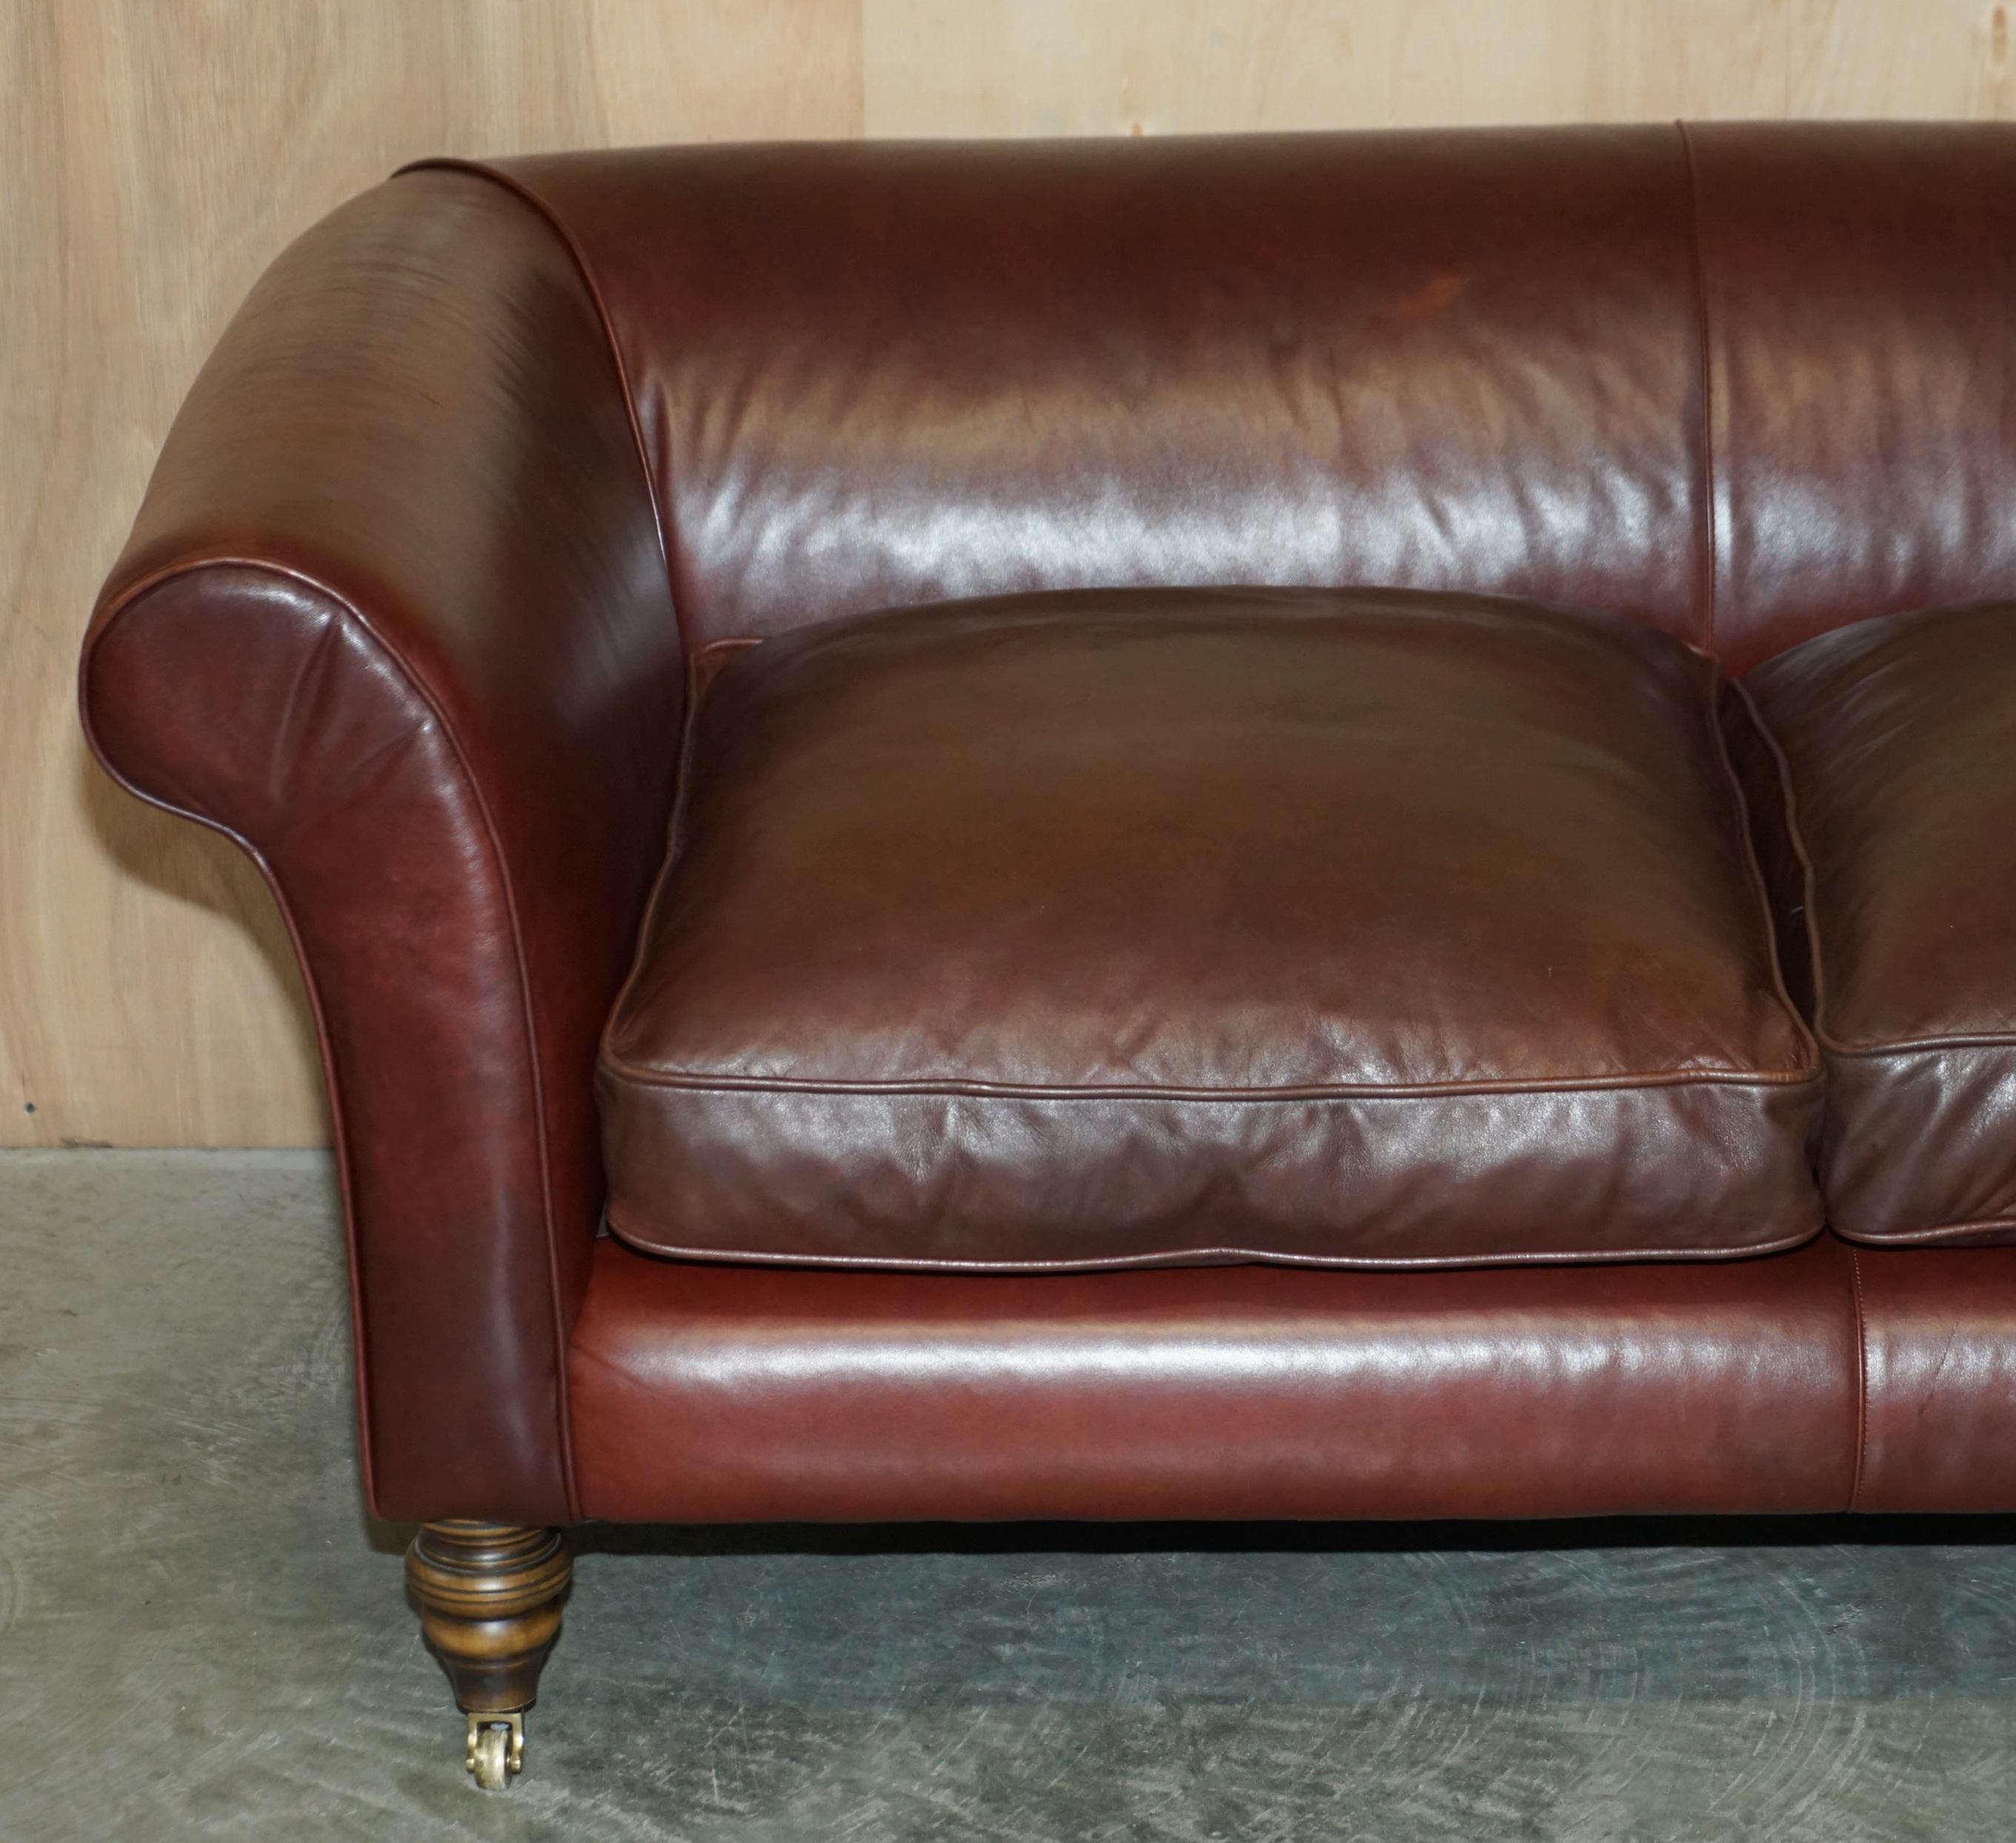 Art déco ViNTAGE DYED BROWN LEATHER ART DECO THREE SEAT SOFA FEATHER FILLED SEAT en vente